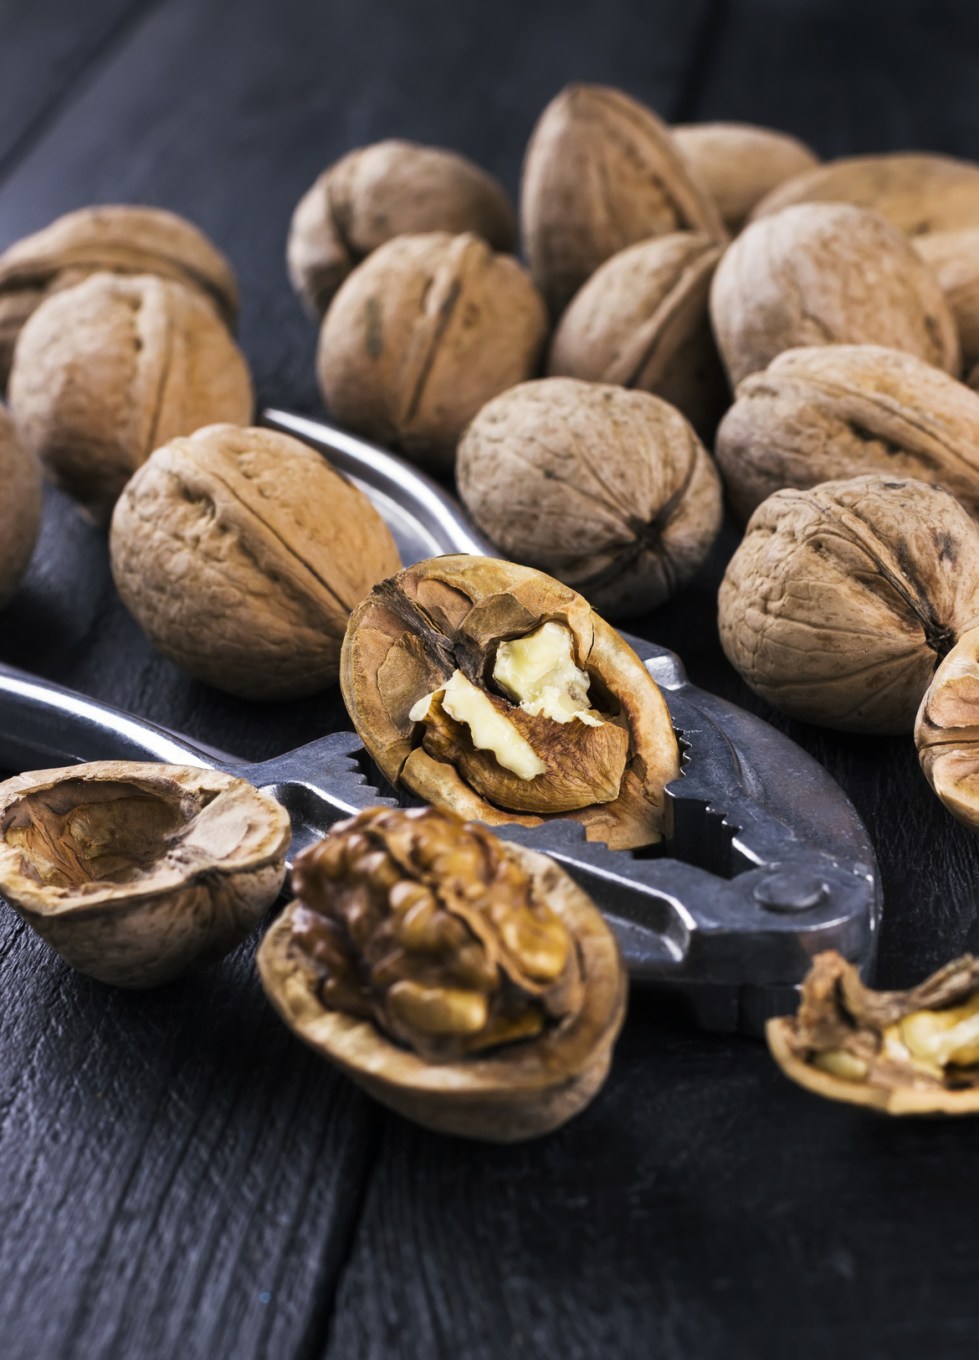 Walnut kernels and whole walnuts on wooden background